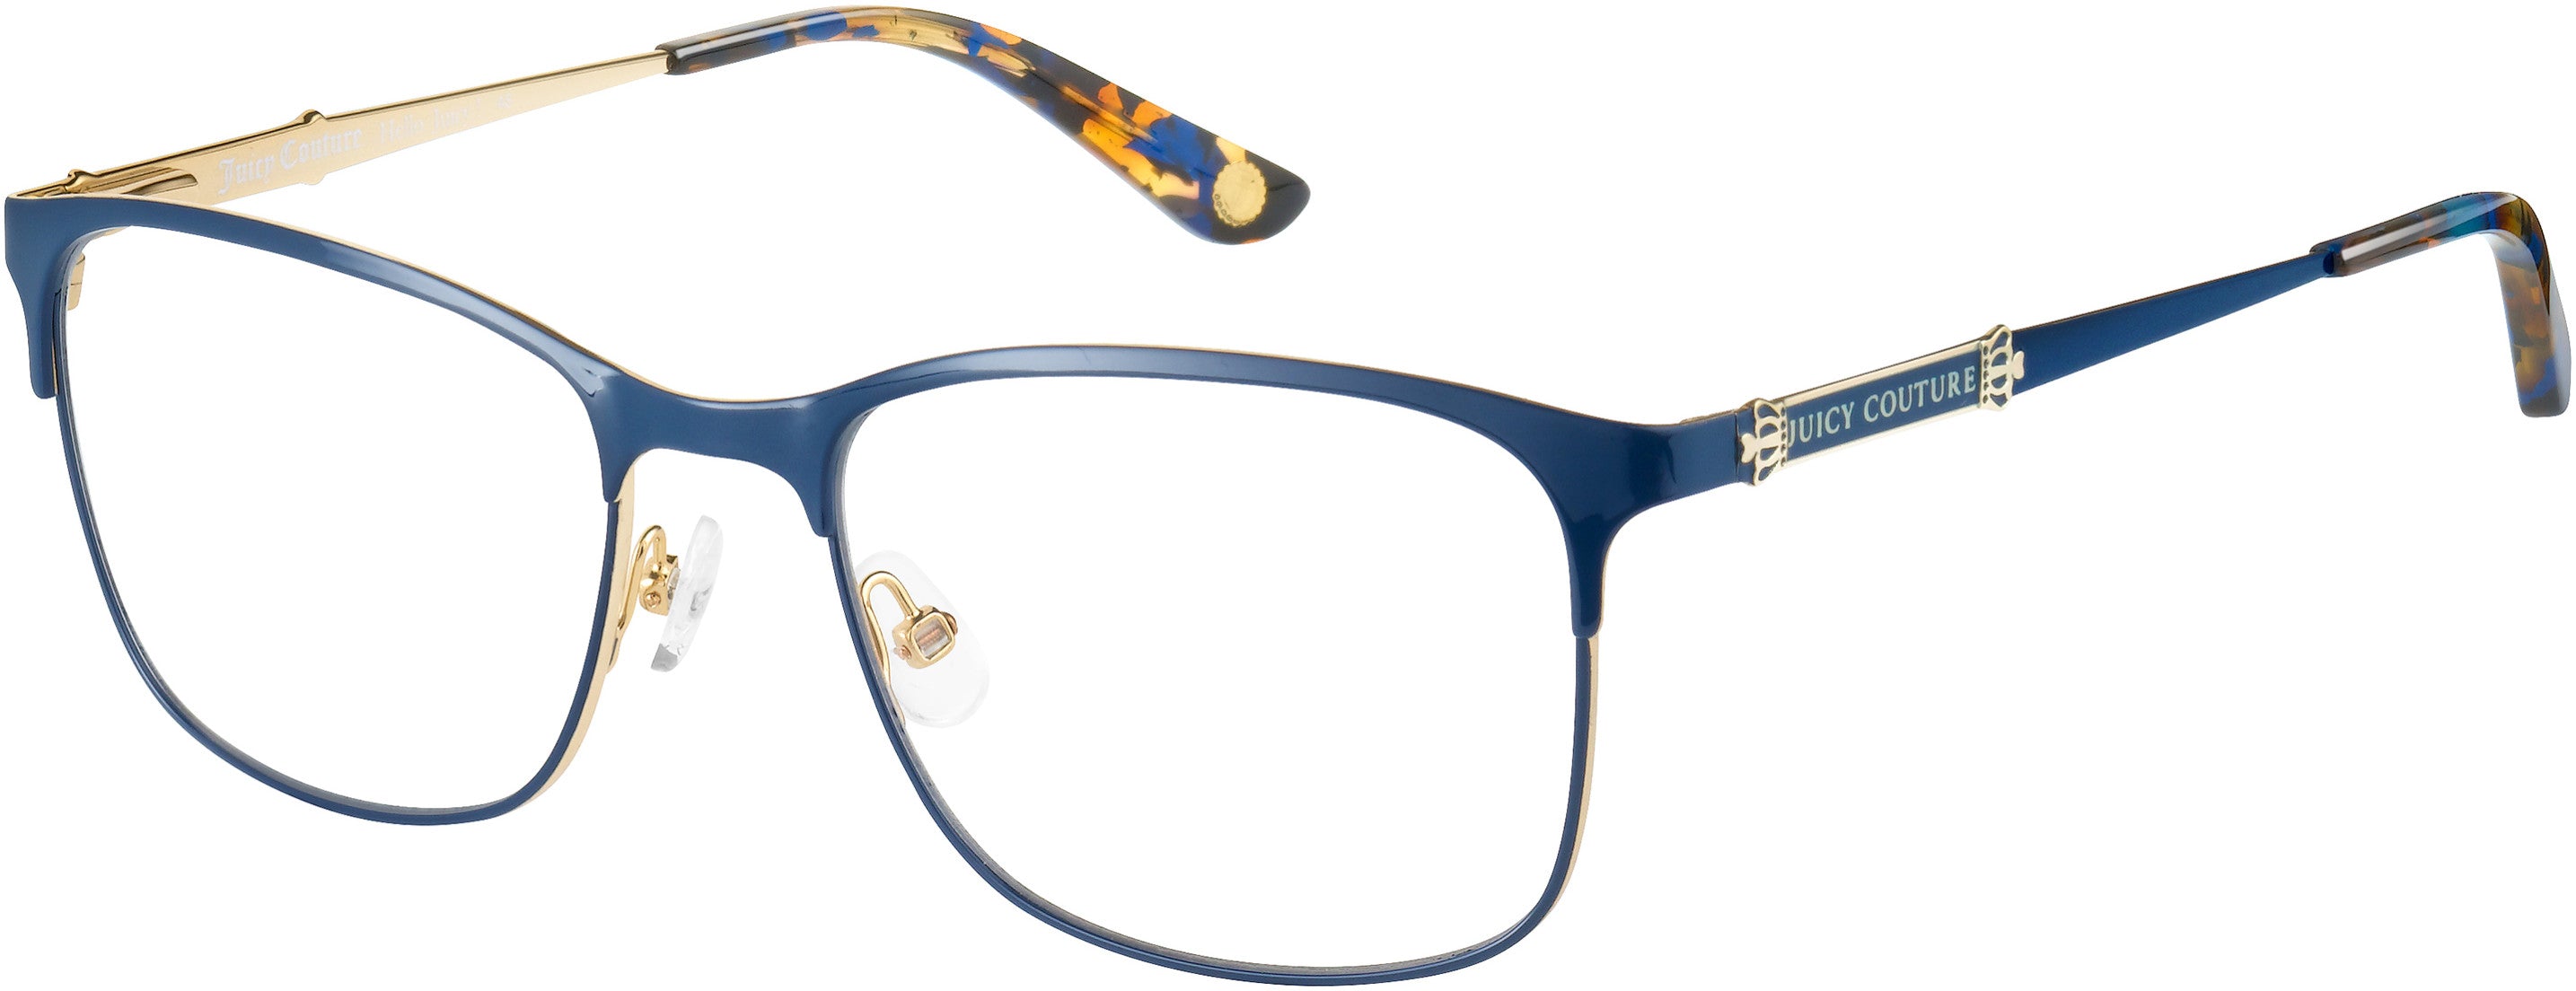 Juicy Couture Juicy 168 Square Eyeglasses 0KY2-0KY2  Blue Gold (00 Demo Lens)